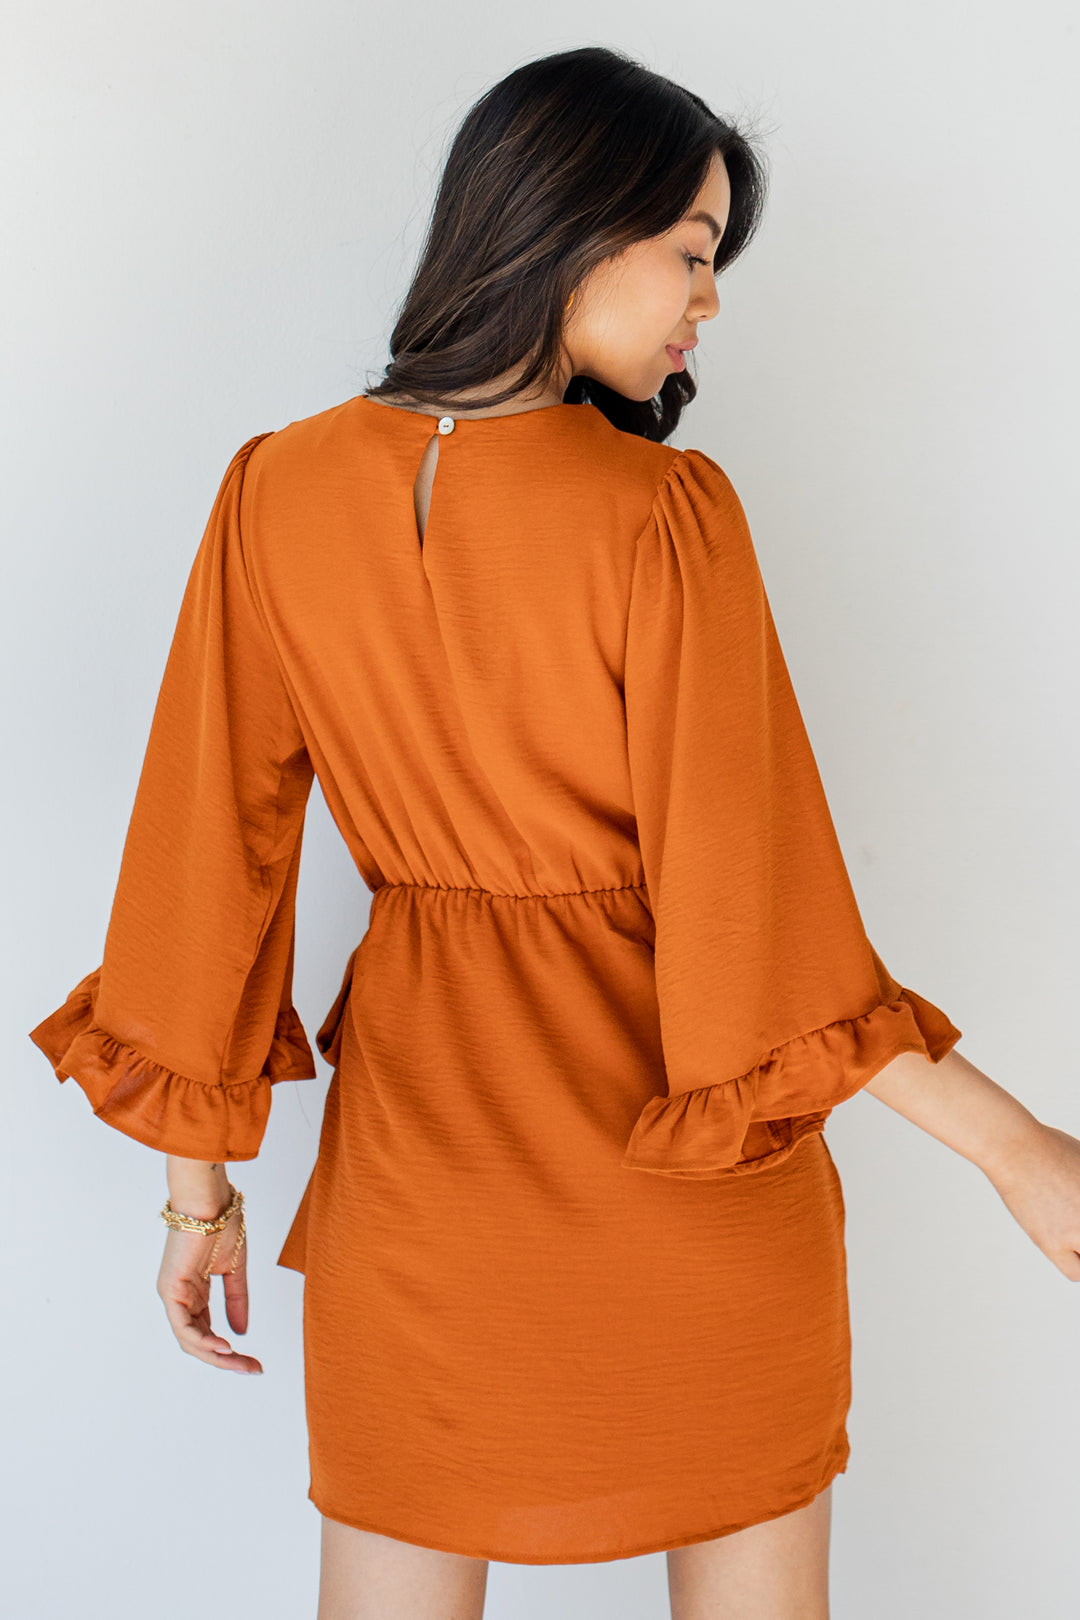 Wrap Dress in rust back view